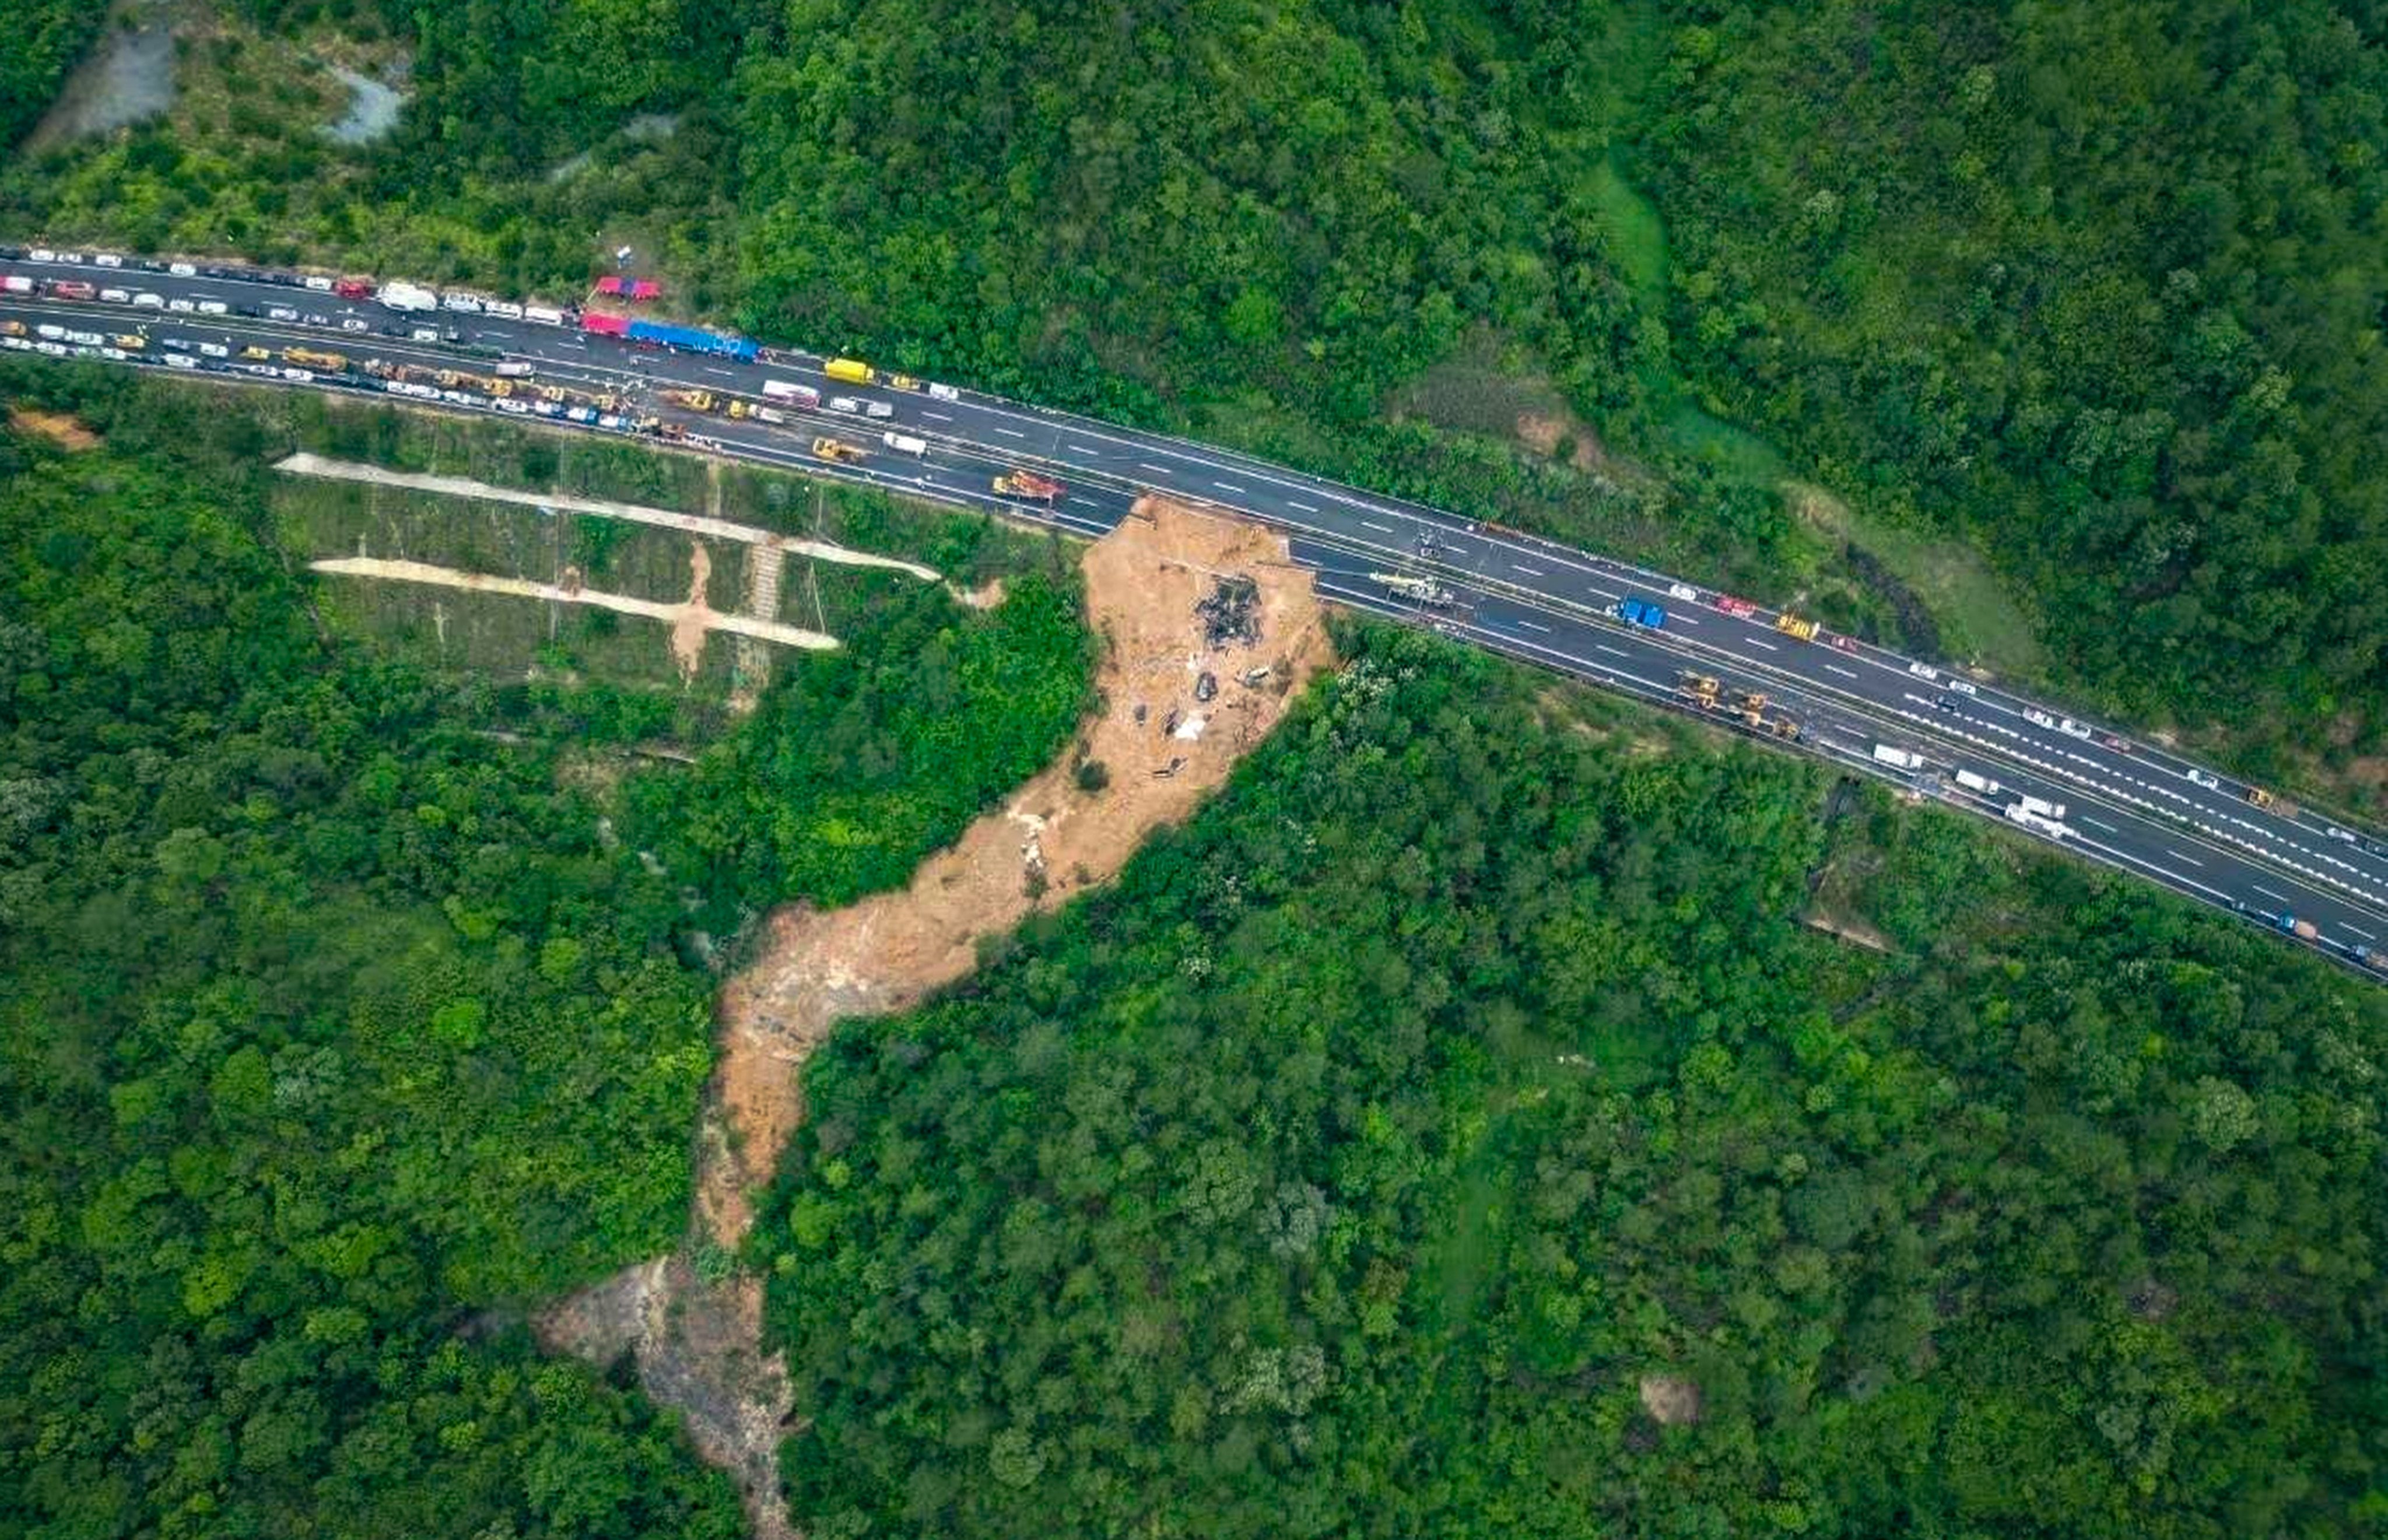 Fatal collapse in Guangdong happened as China begins a five-day break for Labour Day, when highways are toll-free and see heavy traffic. Photo: Weibo